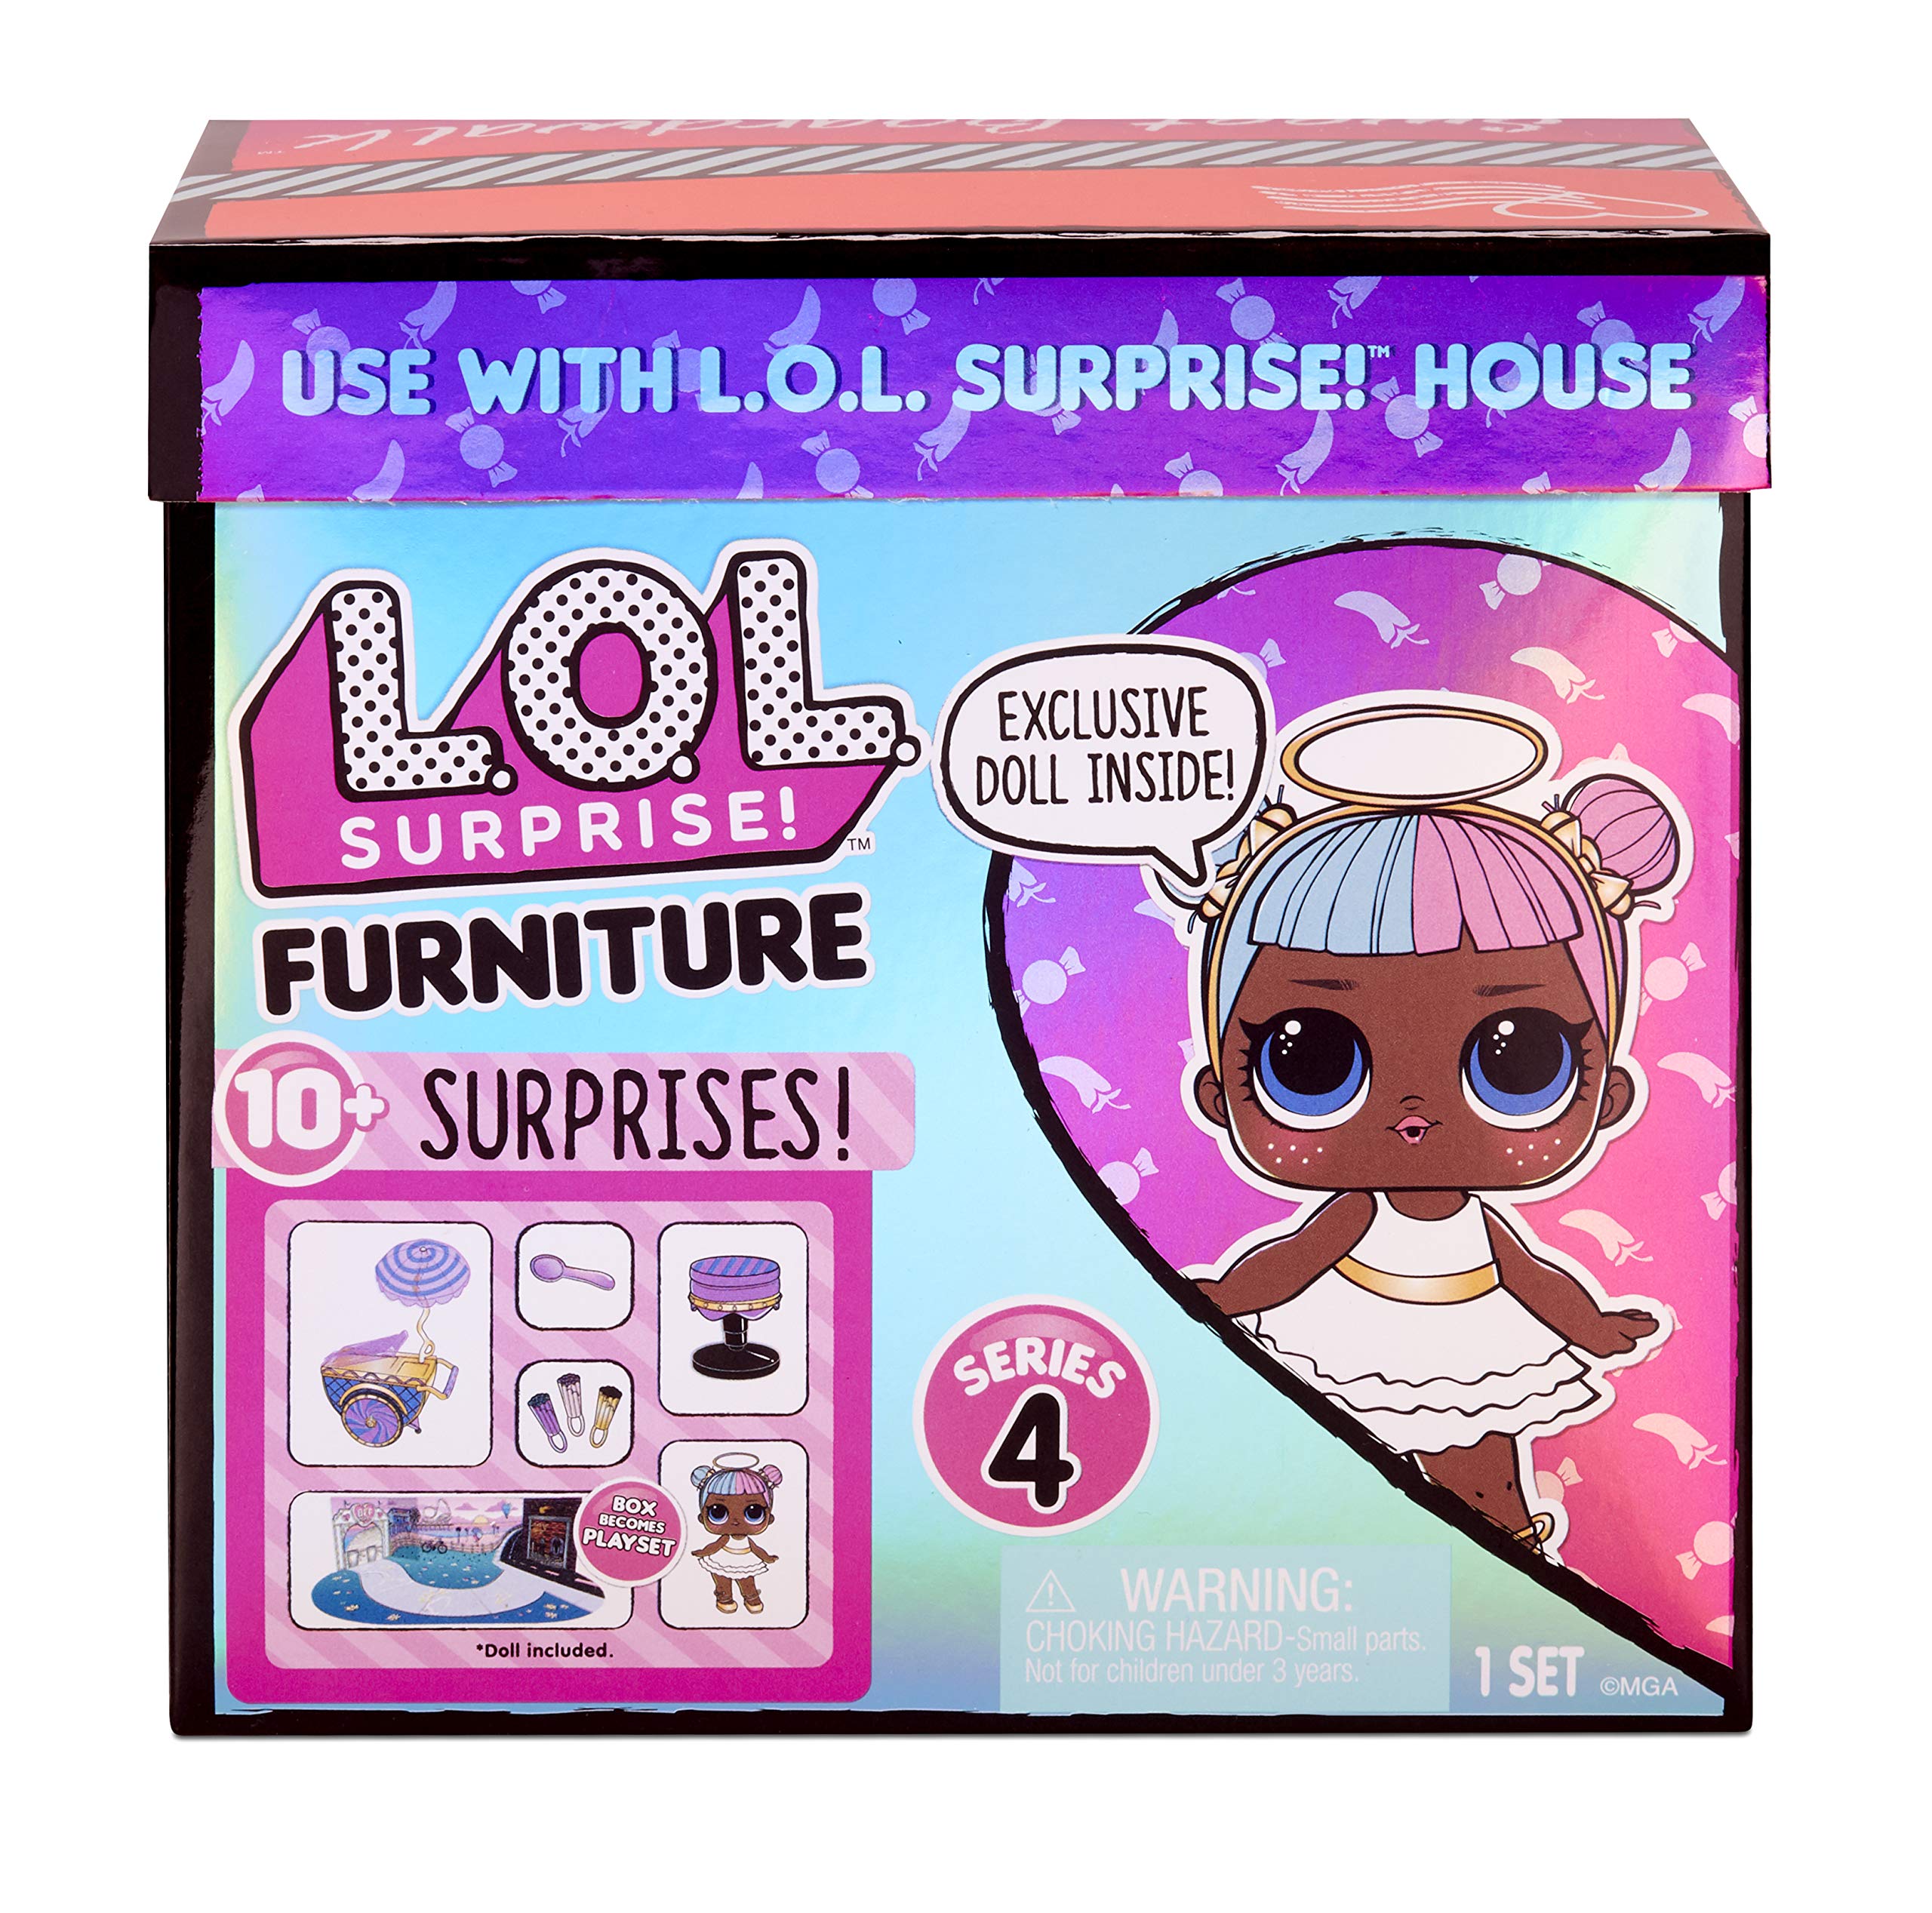 L.O.L. Surprise! LOL Surprise Furniture Sweet Boardwalk with Sugar Doll and 10+ Surprises, Doll Candy Cart Furniture Set, Accessories